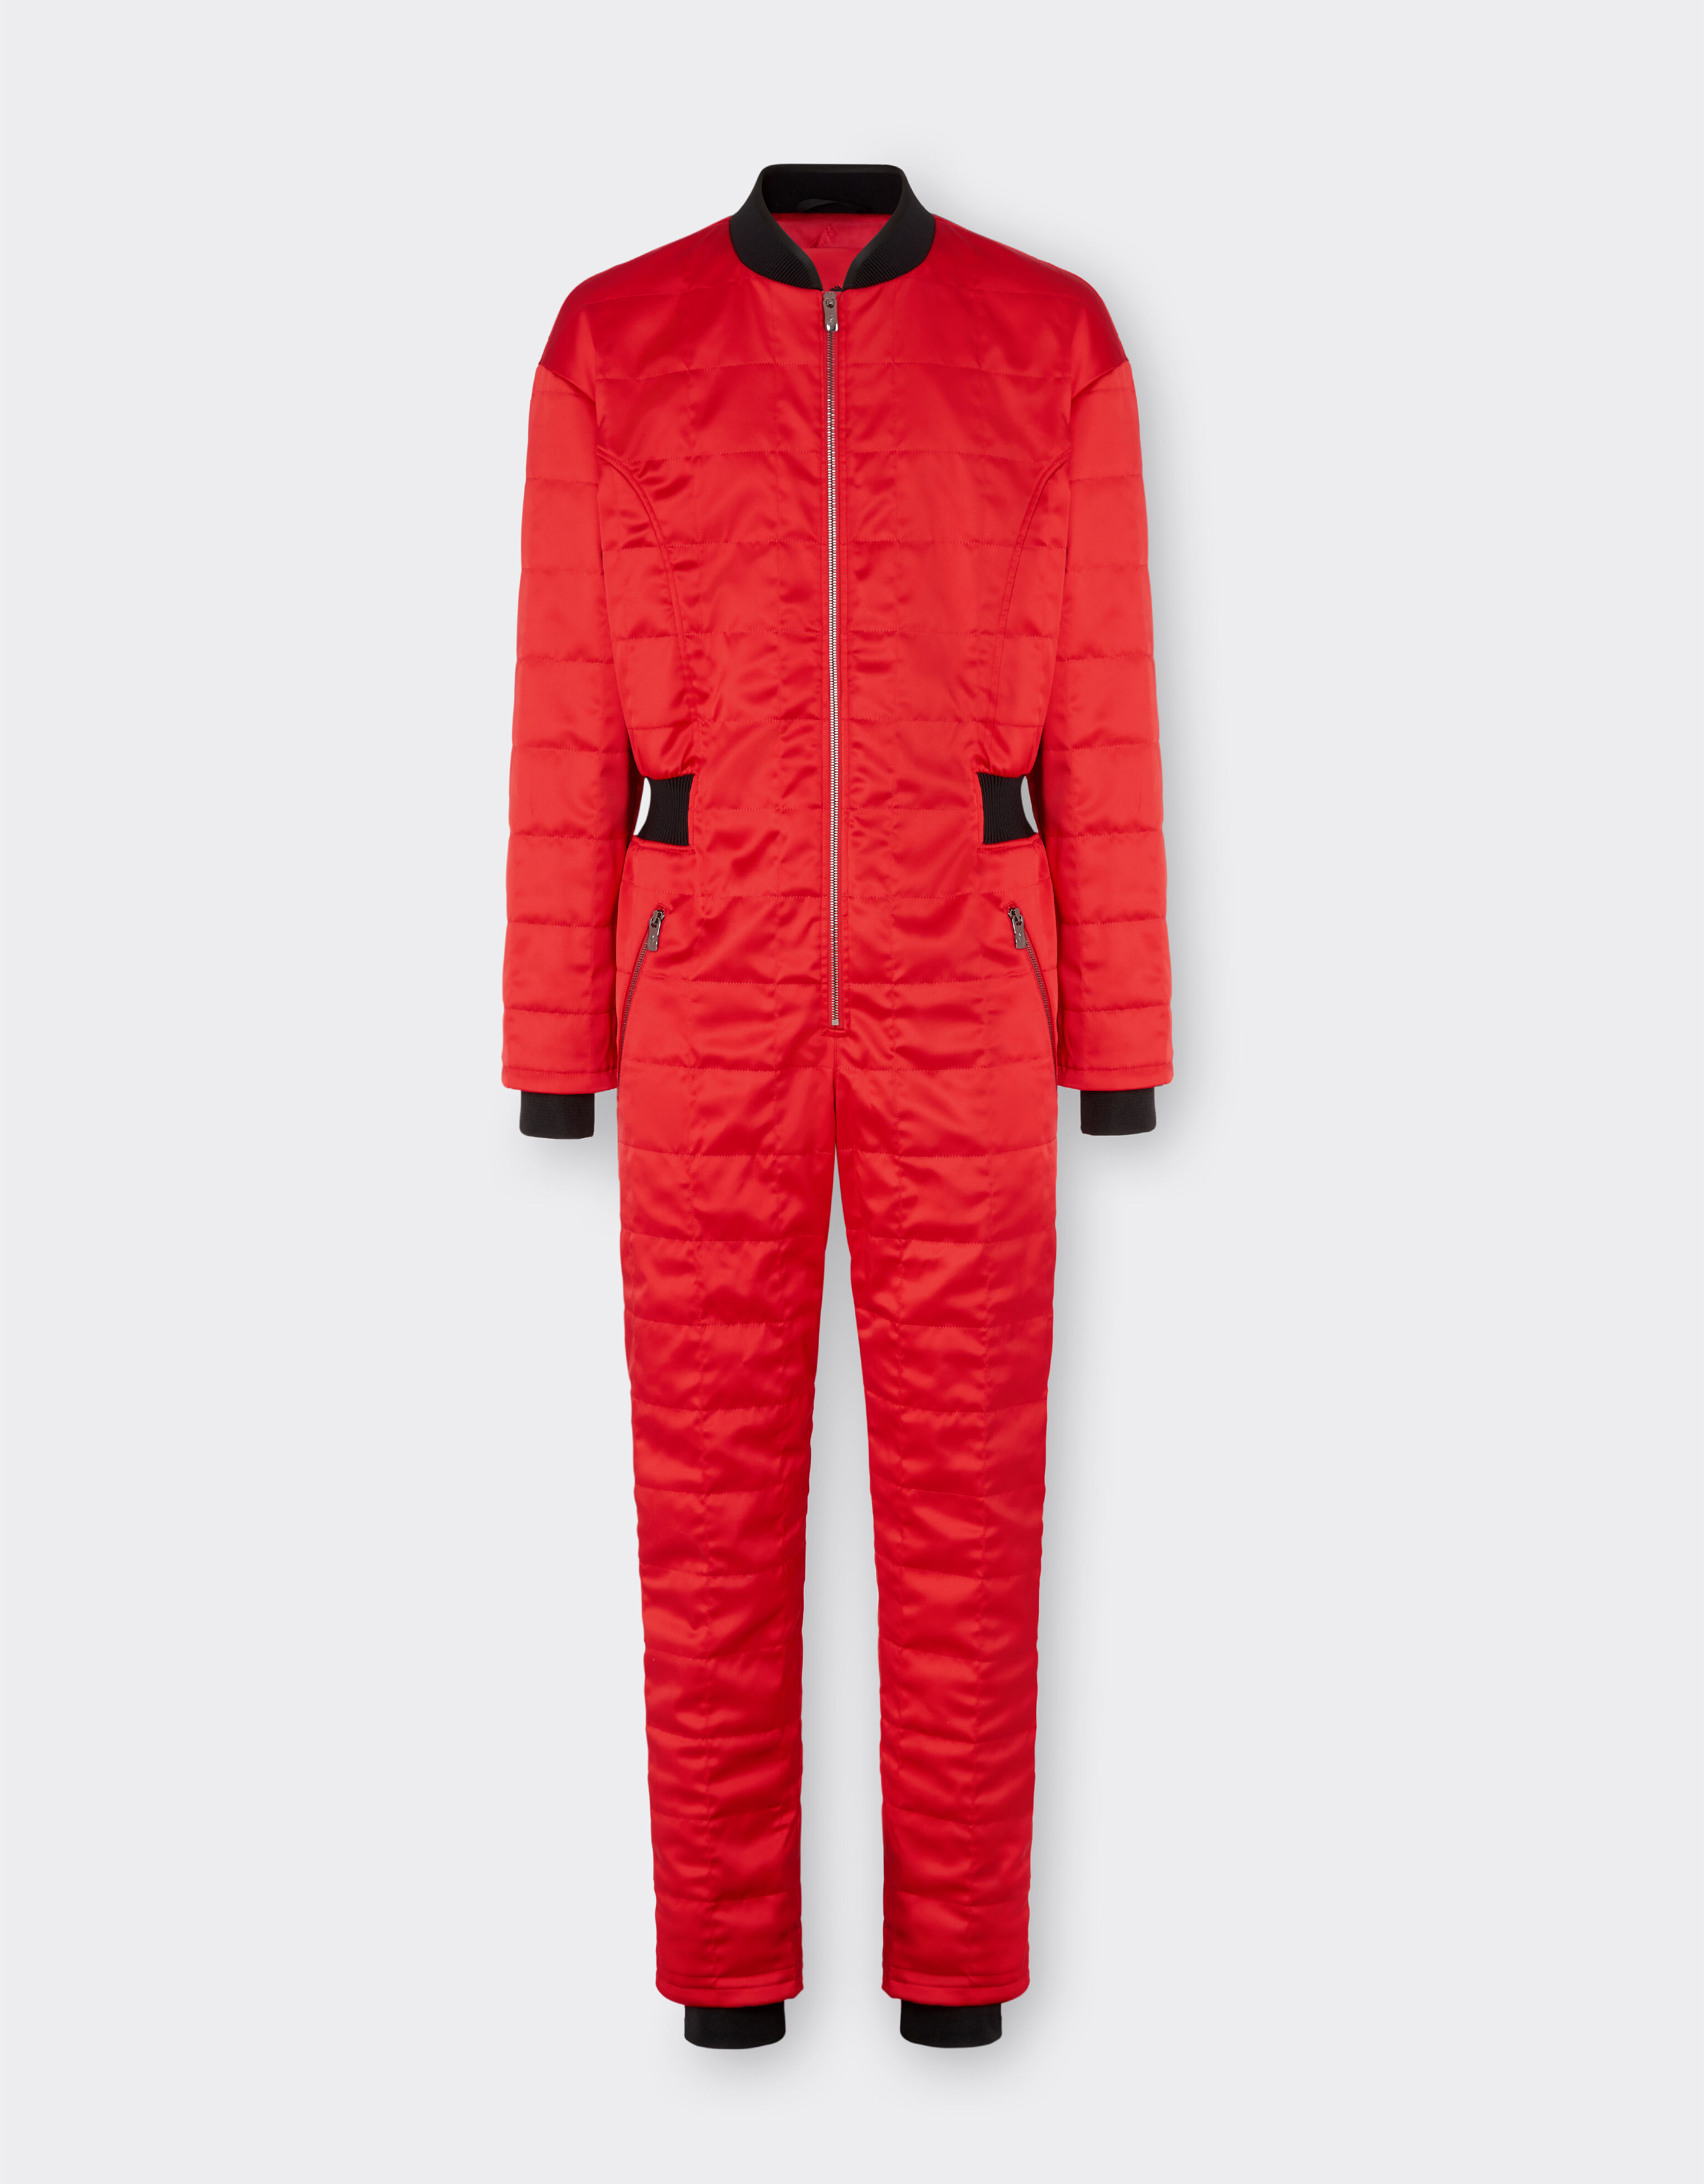 Ferrari Jumpsuit in Q-CYCLE® fabric with ‘7x7’ quilted pattern Blu Scozia 47525f